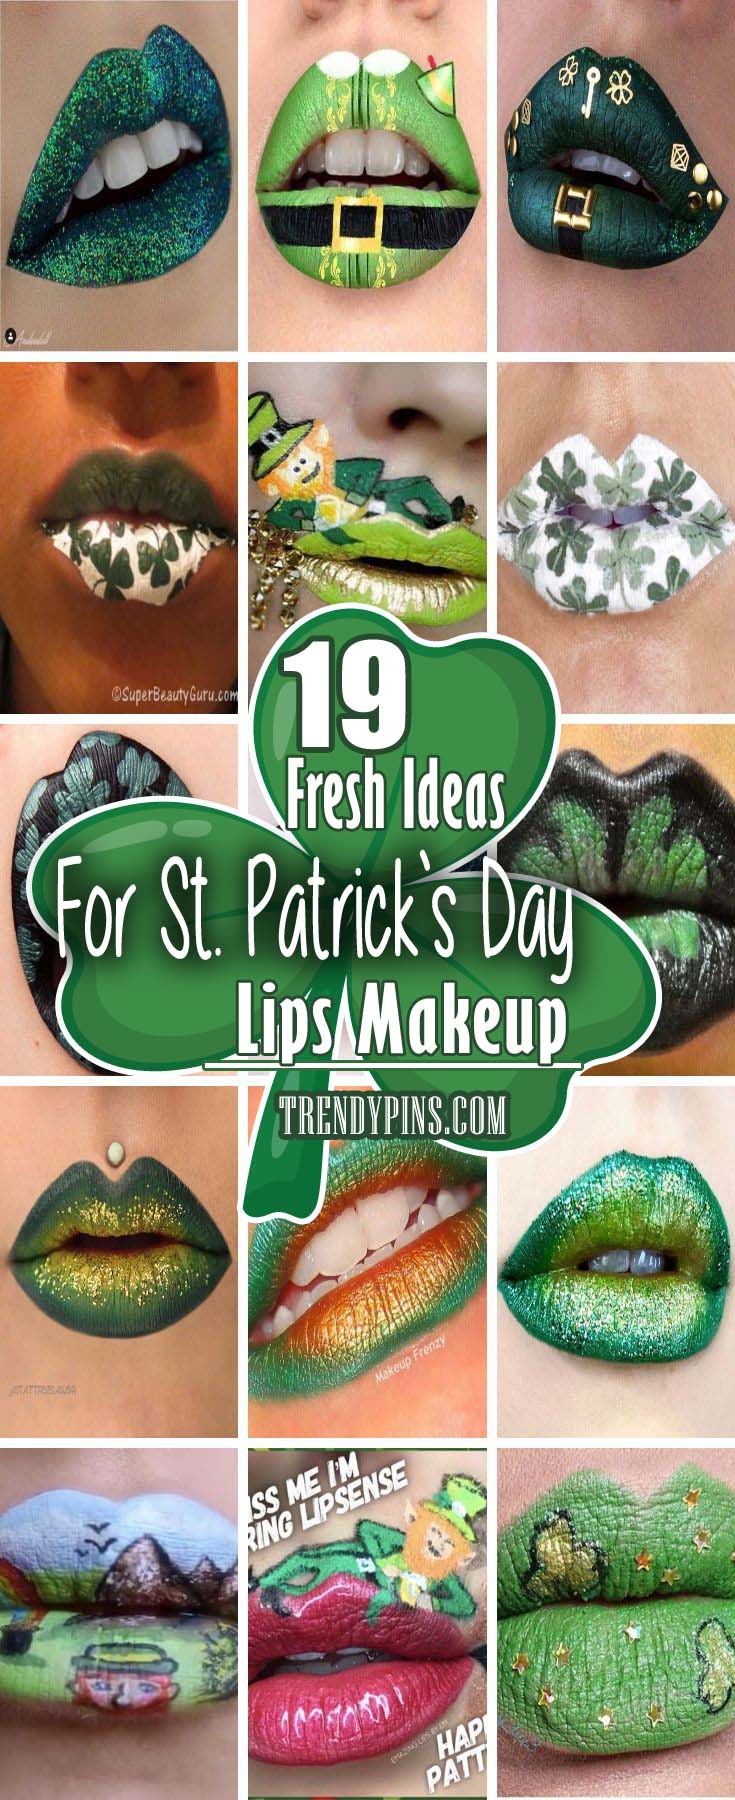 Just spend some time in looking through all these 19 fresh ideas of lip makeup. Choose one of them and we promise you to gather tones of admirations about your appearance. #St. Patrick's day lips makeup #beauty #makeup #trendypins